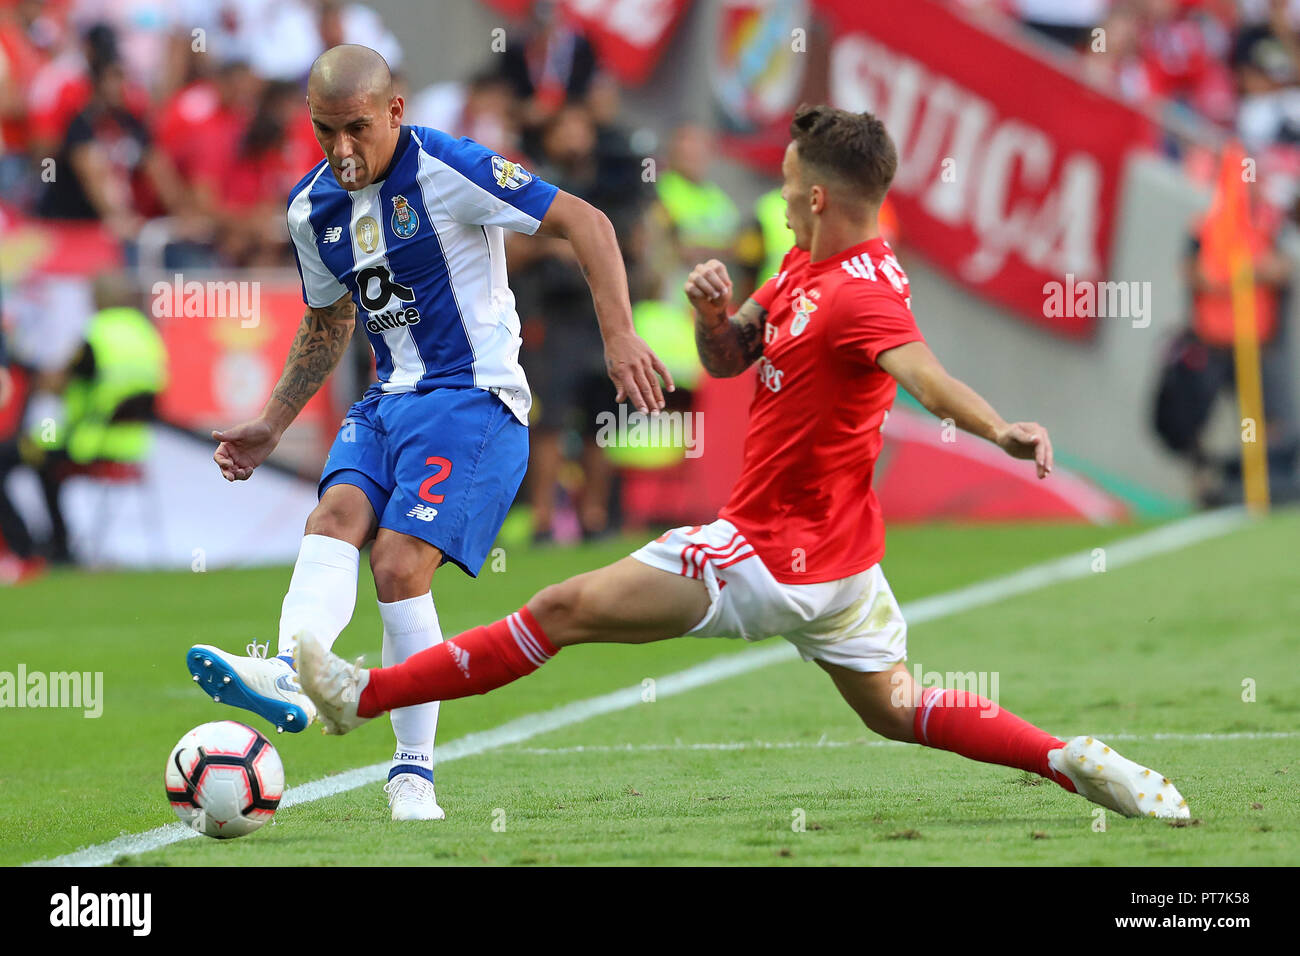 Lisbon, Portugal, Portugal. 7th Oct, 2018. Maxi Pereira of FC Porto (L) with Ãlex Grimaldo of SL Benfica (R) seen in action during League NOS 2018/19 football match between SL Benfica vs FC Porto. Credit: David Martins/SOPA Images/ZUMA Wire/Alamy Live News Stock Photo